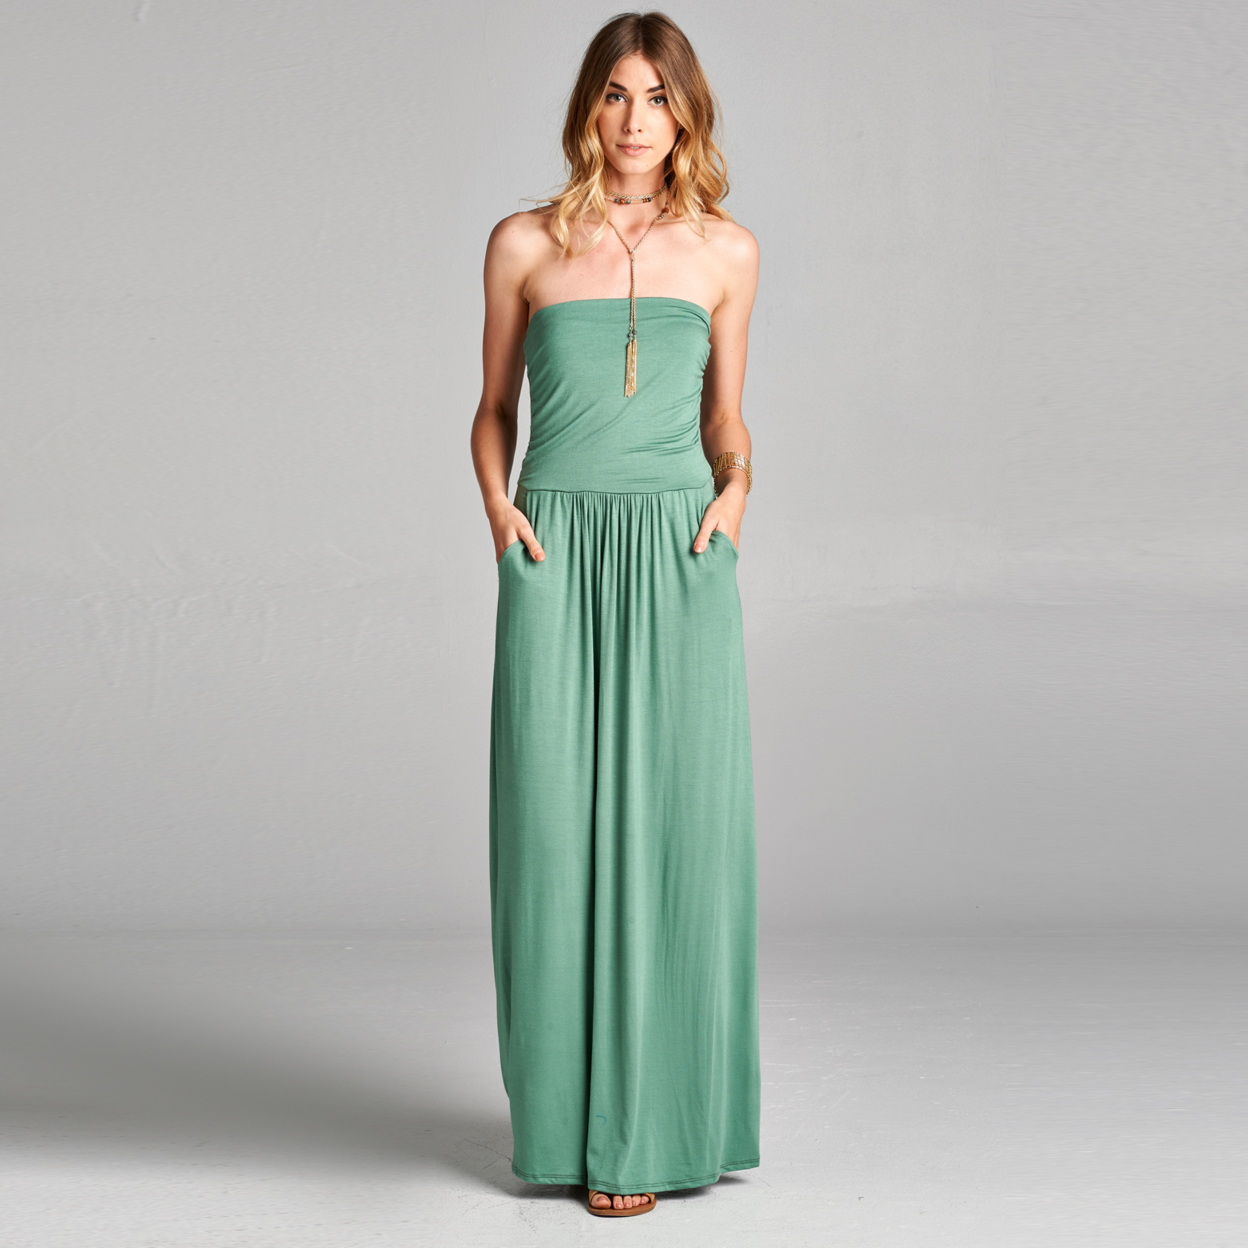 Atlantis Strapless Maxi Dress With Pockets In 6 Colors - Teal, Small (4-6)